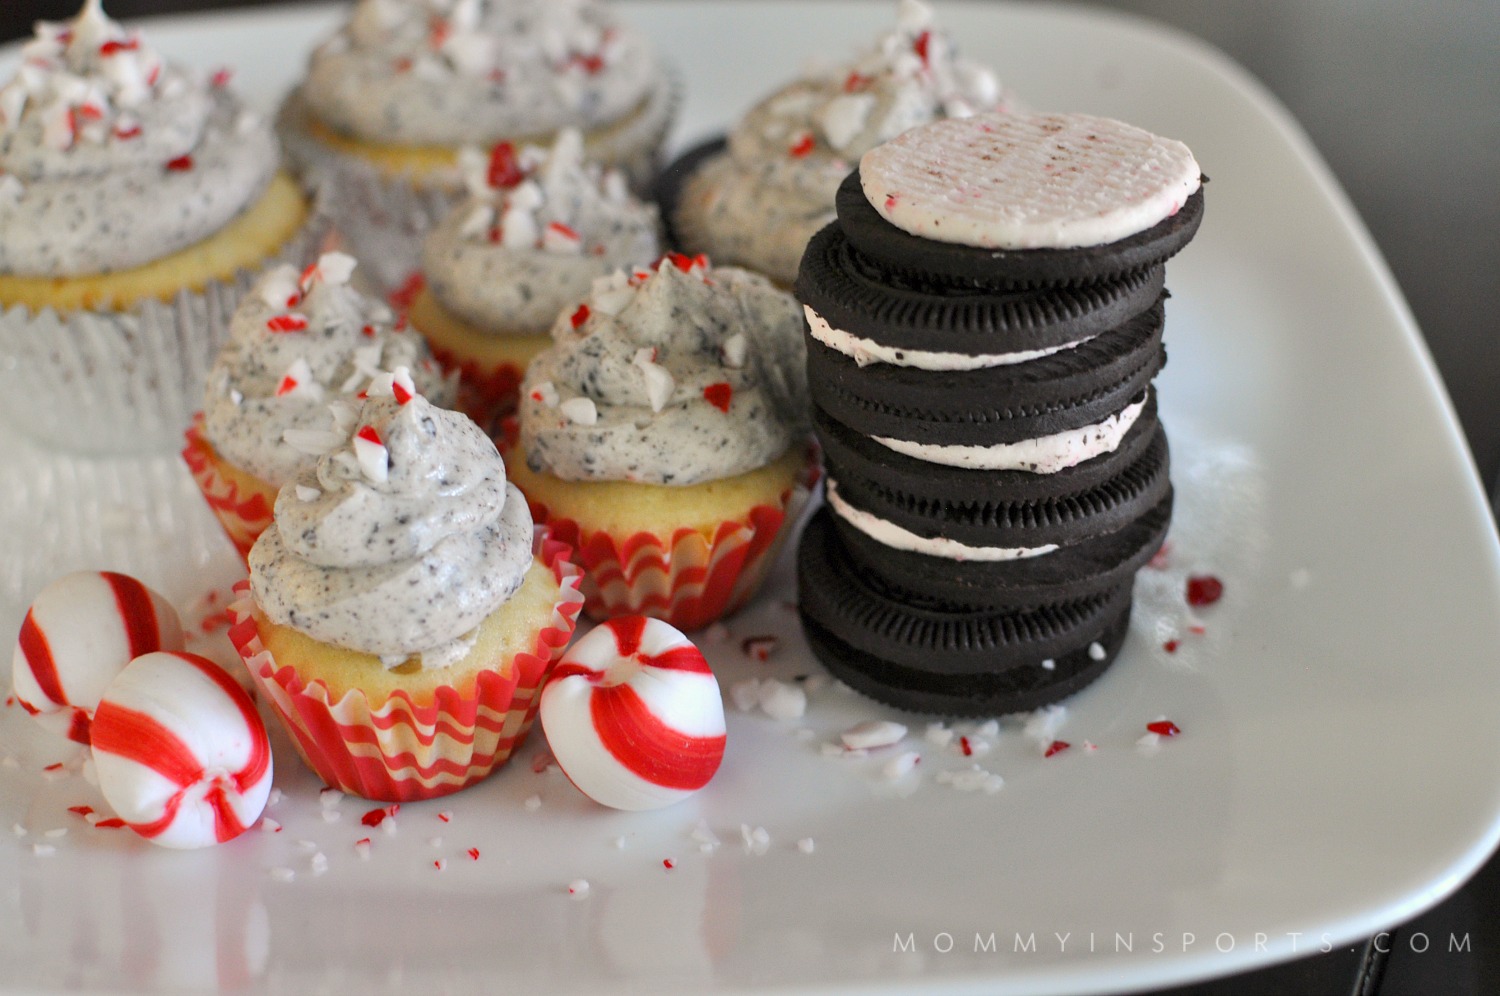 Looking for the perfect vanilla peppermint cupcakes recipe? Try these with some homemade peppermint Oreo frosting! Will spice up any holiday party!